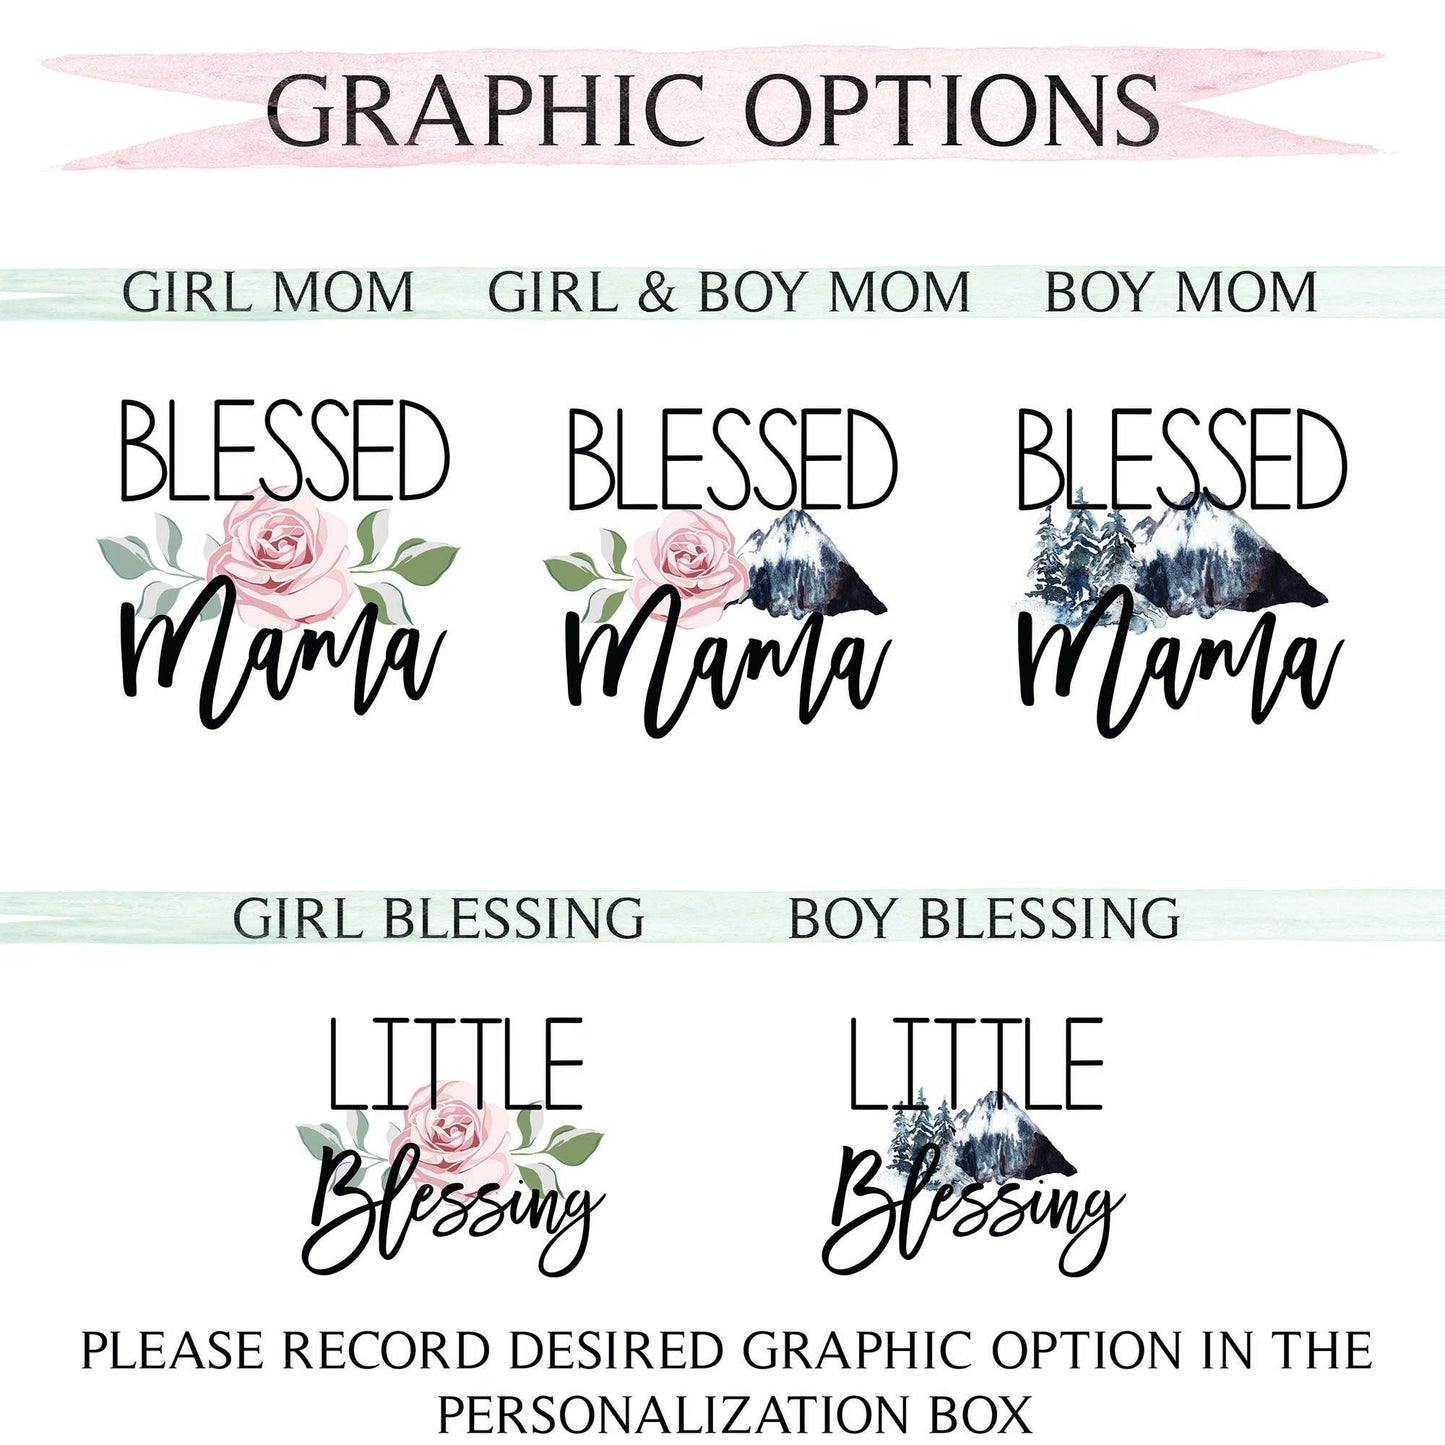 Blessed Mama Mother's Day Matching Shirts - Squishy Cheeks